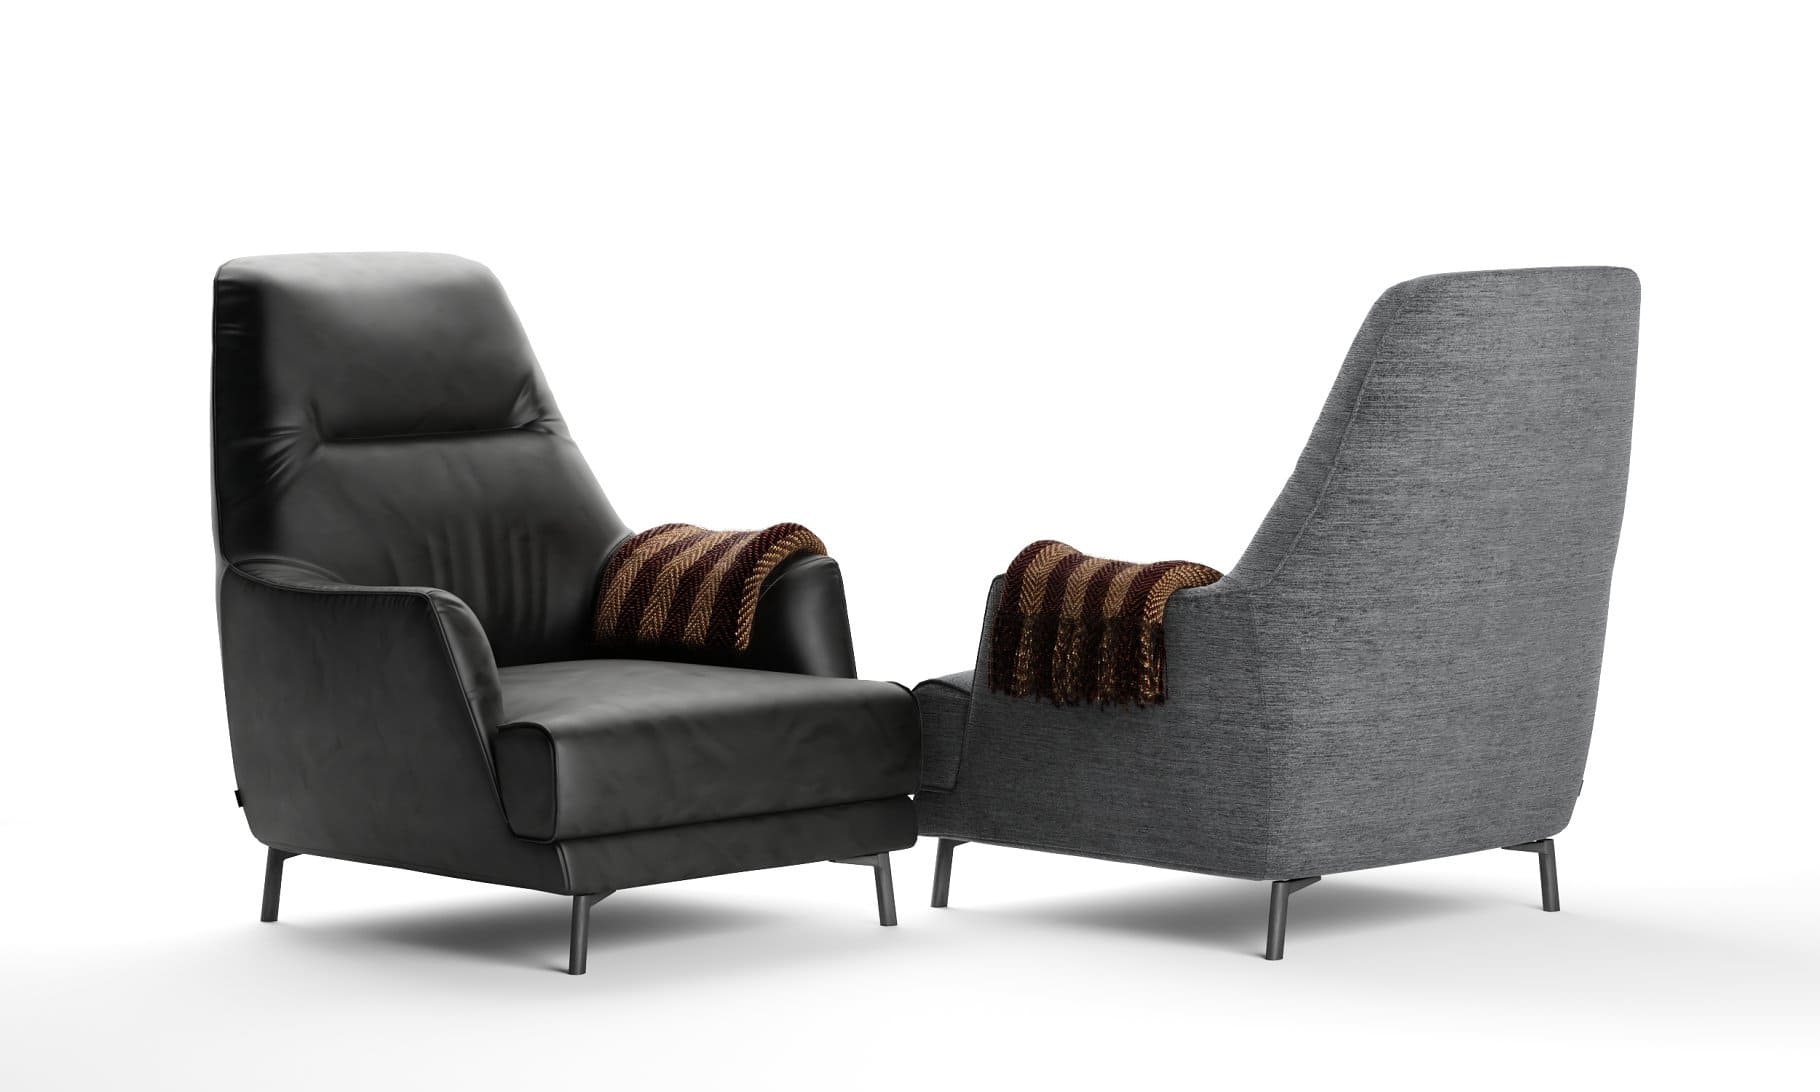 Perfect seat upholstery in black and gray.